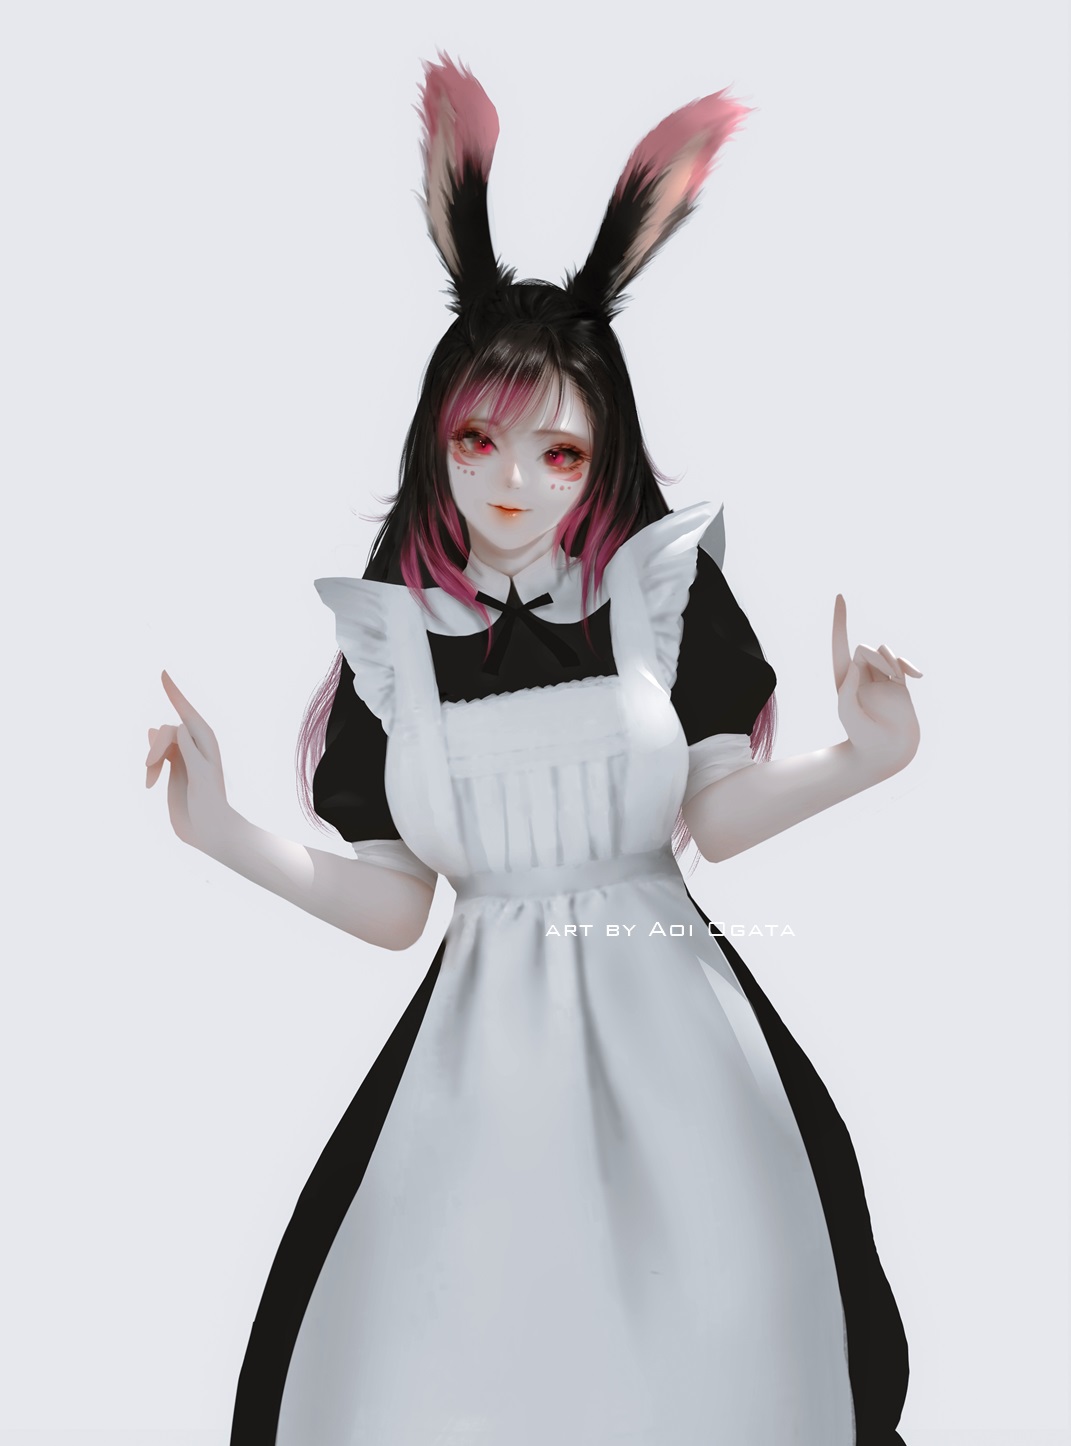 Anime 1071x1446 Aoi Ogata 2D Final Fantasy XIV: Shadowbringers viera Final Fantasy anime girls maid outfit portrait display two tone hair white background simple background minimalism